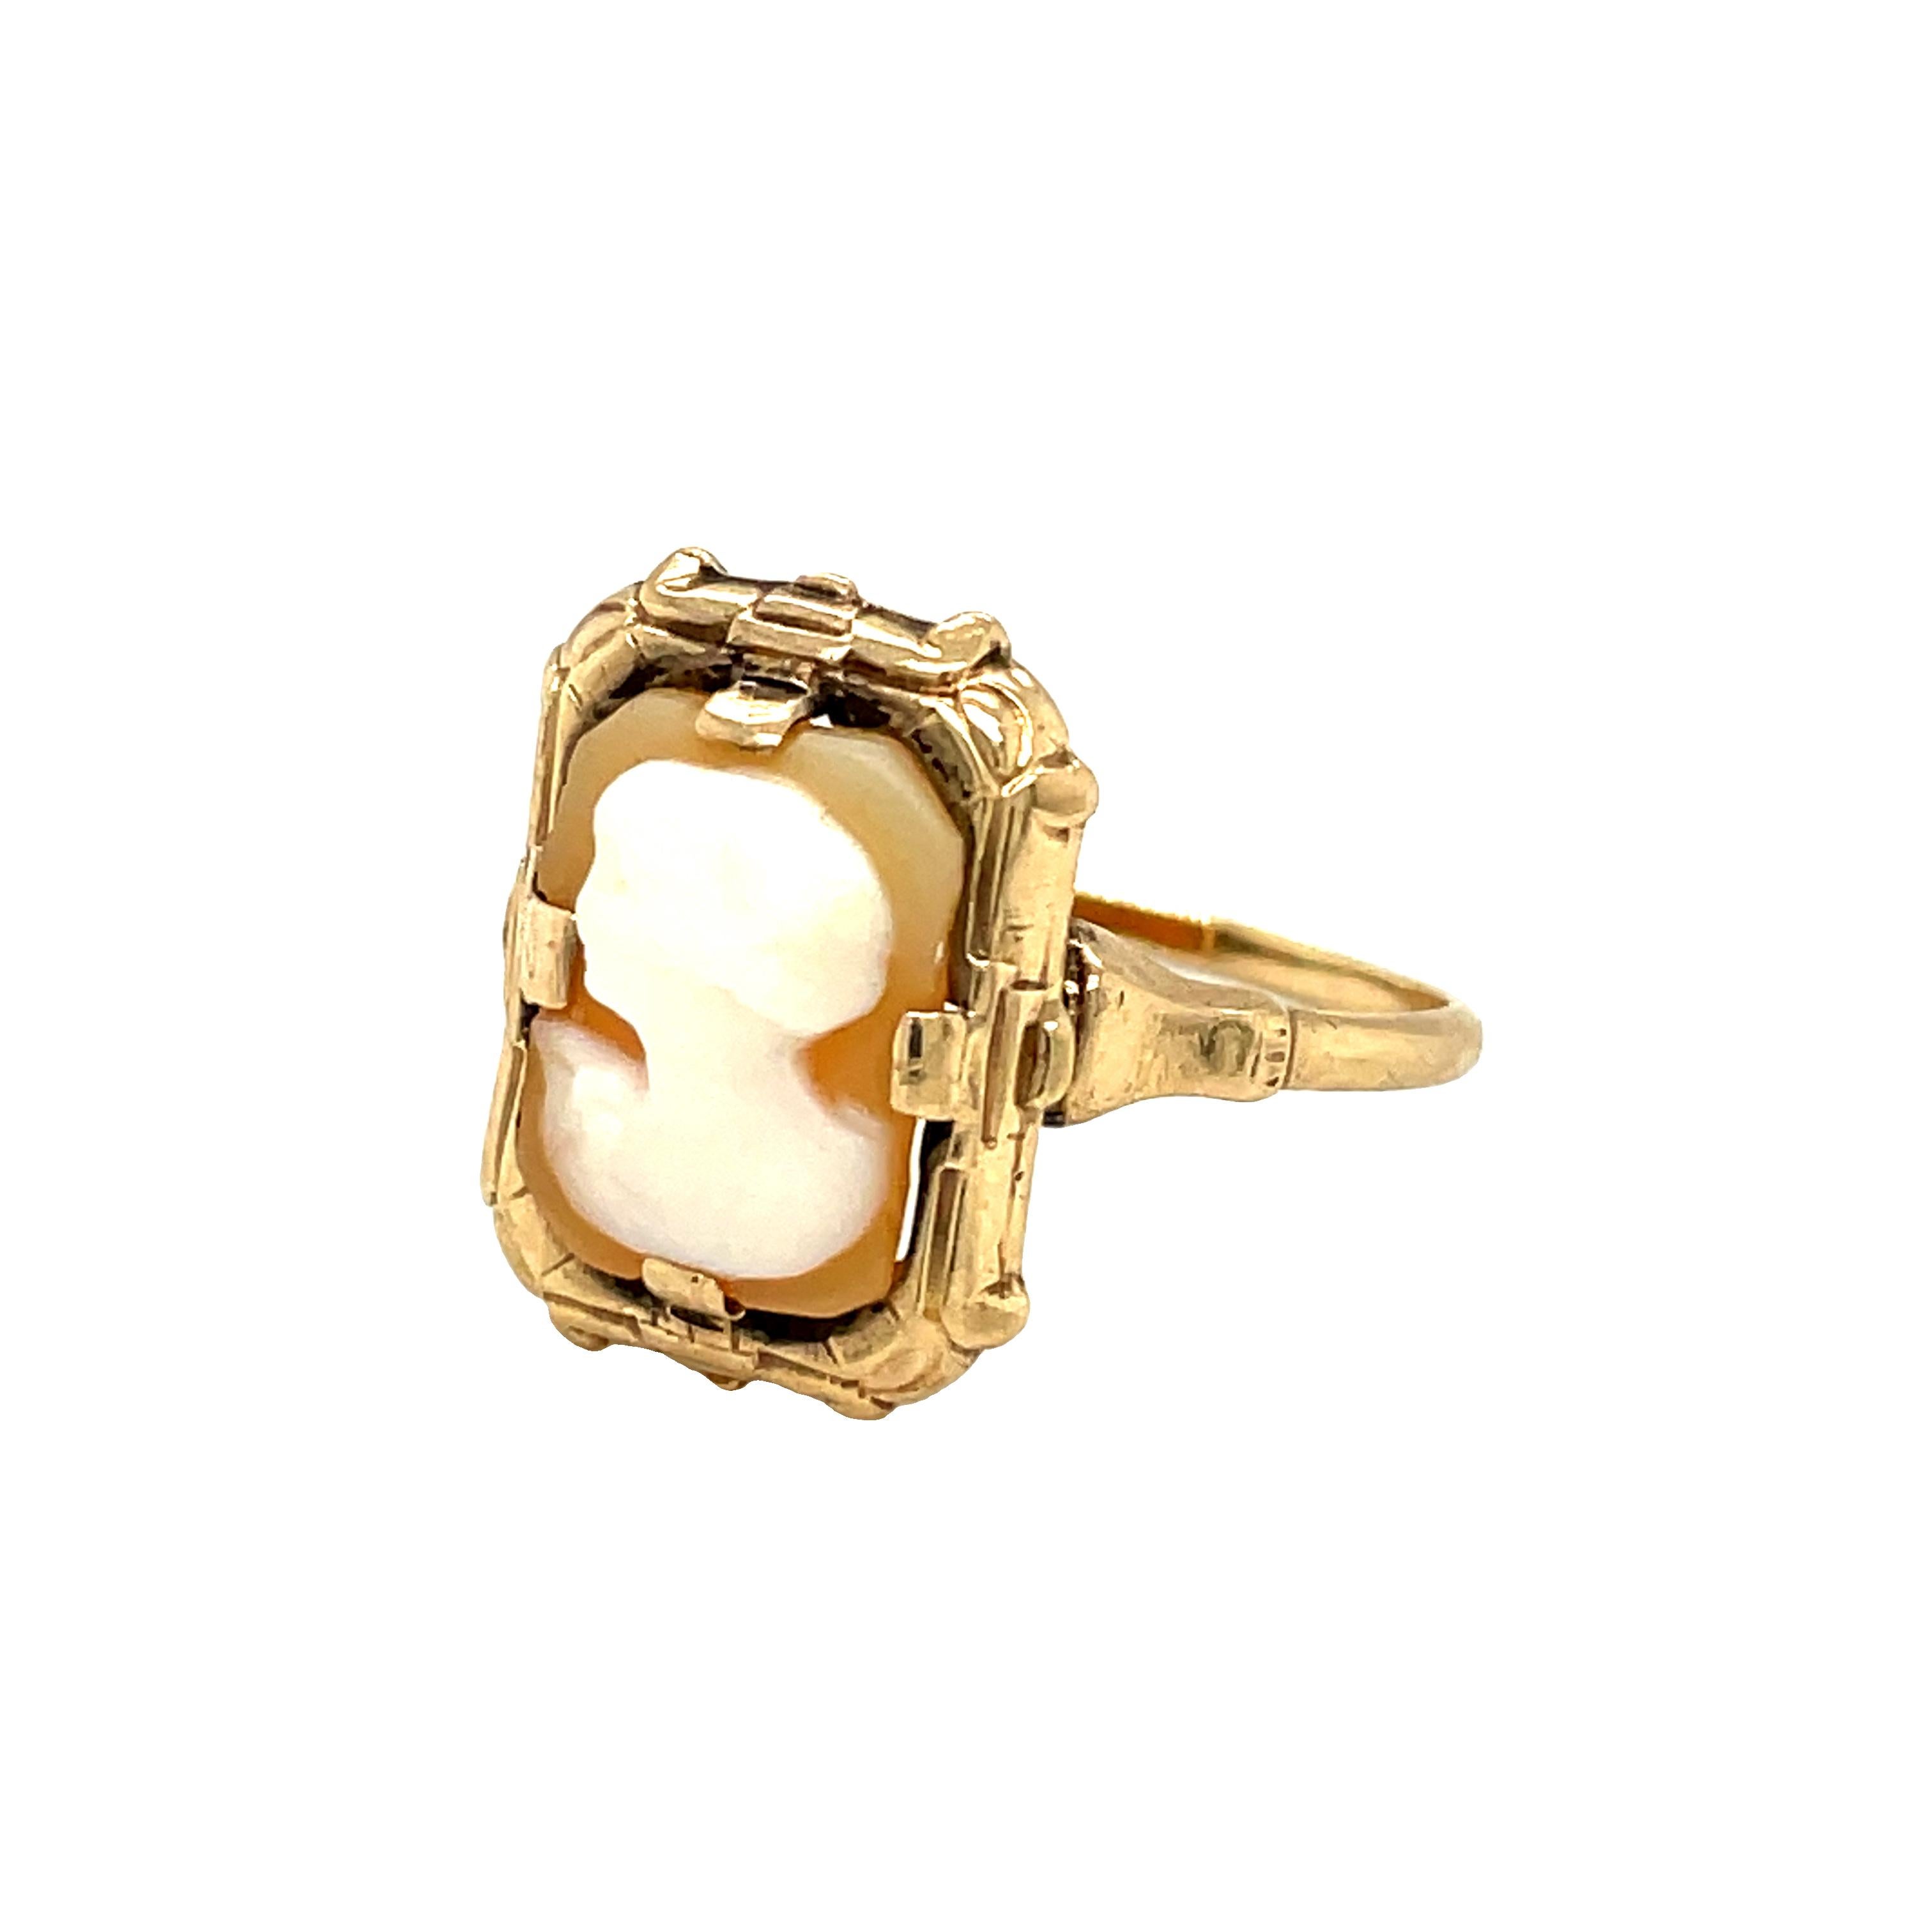 This lovely vintage cameo ring features a rectangle shaped hand carved shell cameo of a lovely lady in profile set in classic 10K yellow gold. The cameo is well carved and set in a decorative frame.  
Cameo measures 12 x 9mm

Metal: 10K
Ring size: